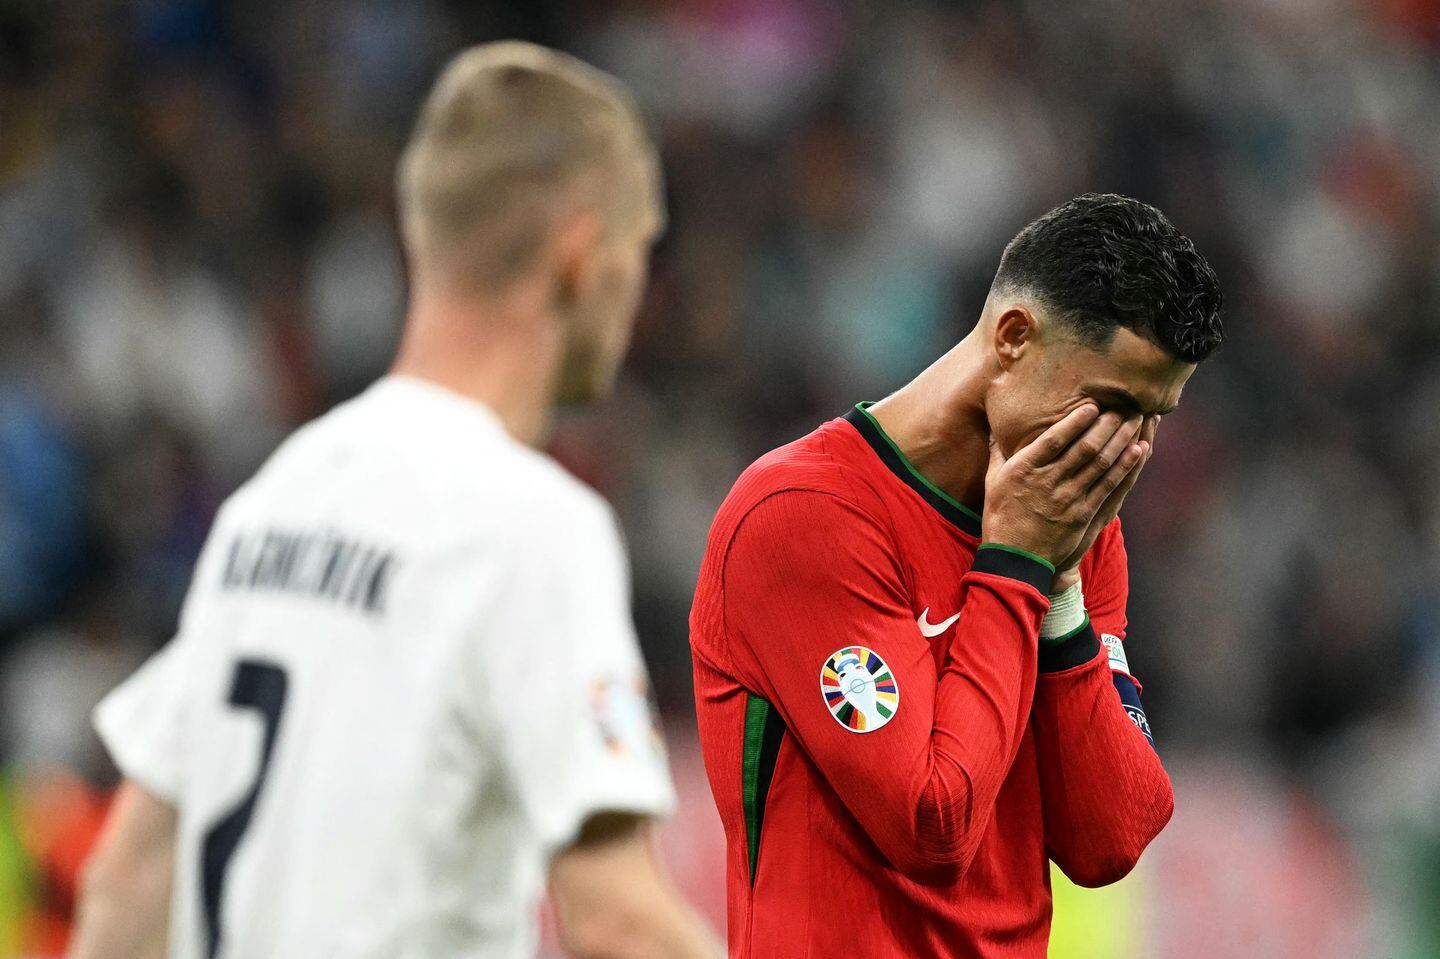 Cristiano Ronaldo rode an emotional roller coaster in Portugal's round of 16 win over Slovenia.